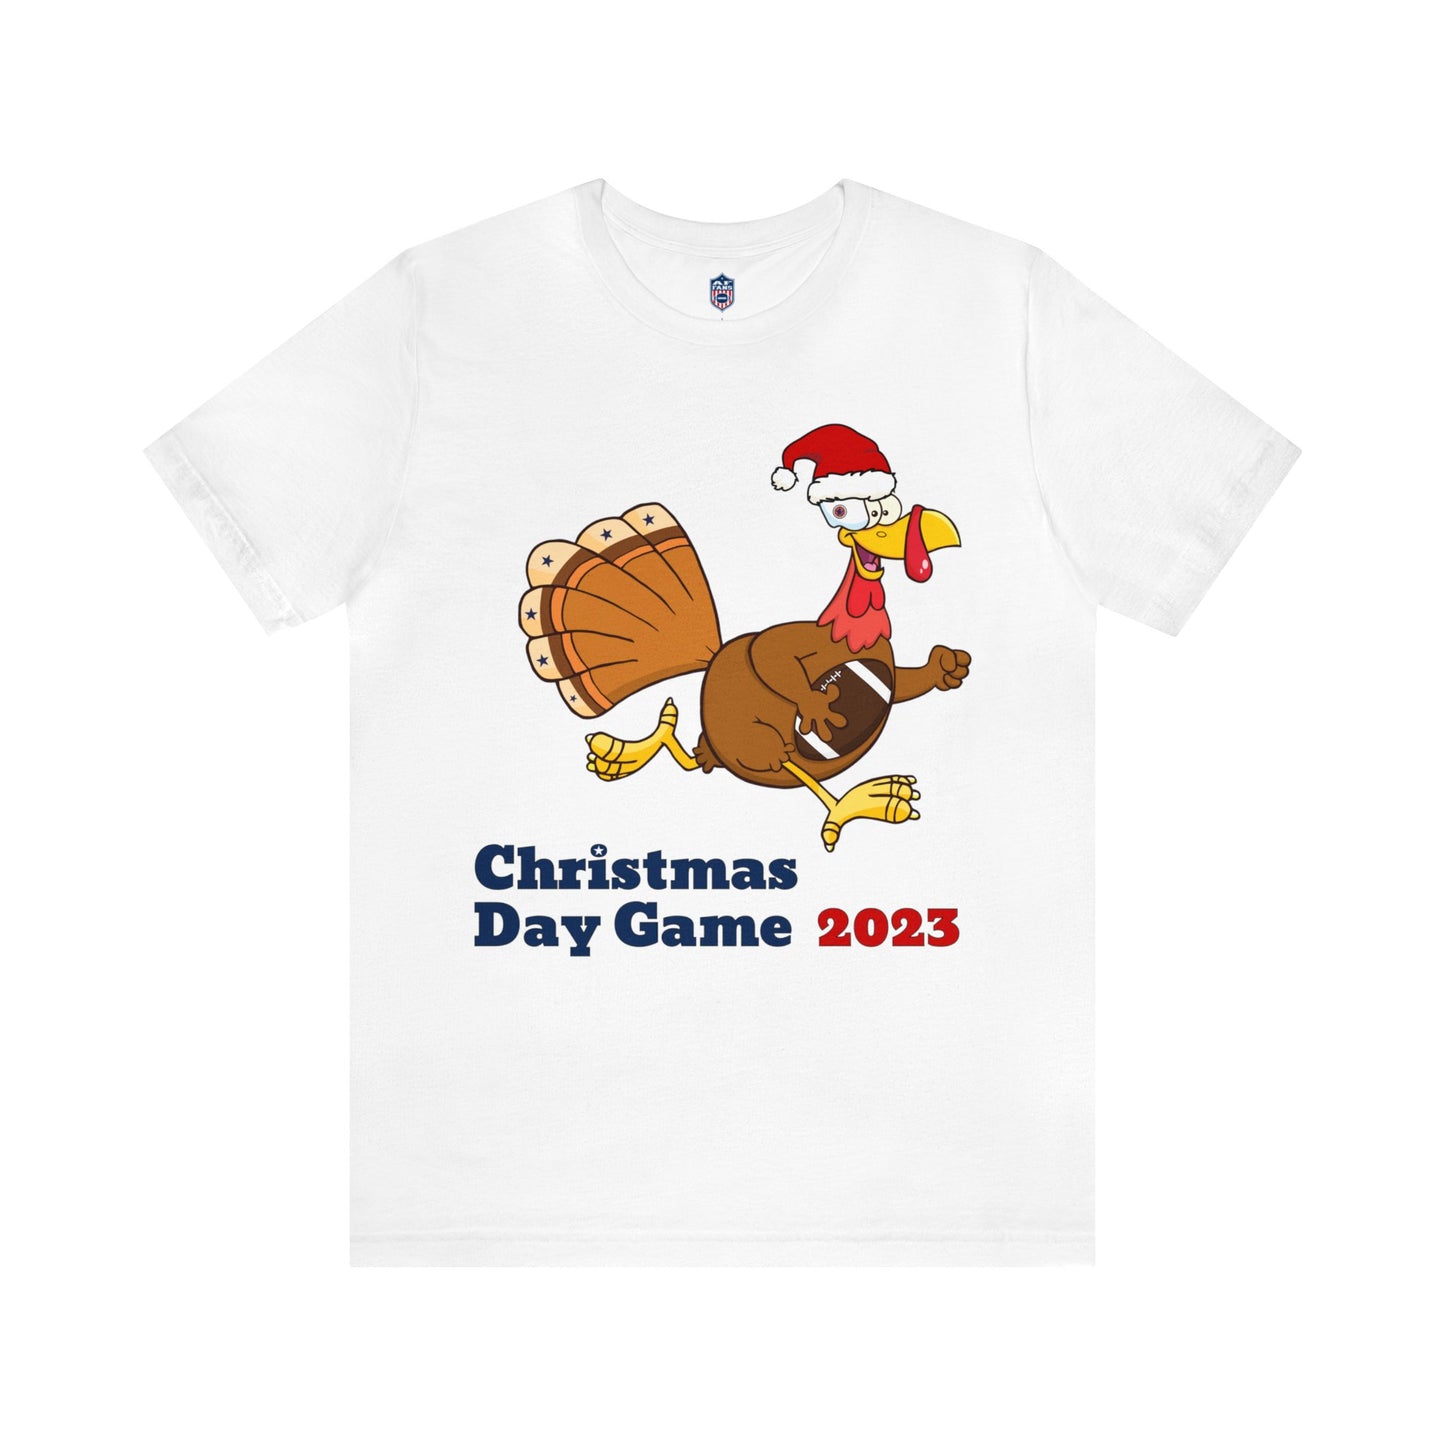 Unisex Jersey Short Sleeve Tee "Christmas day game 2023"